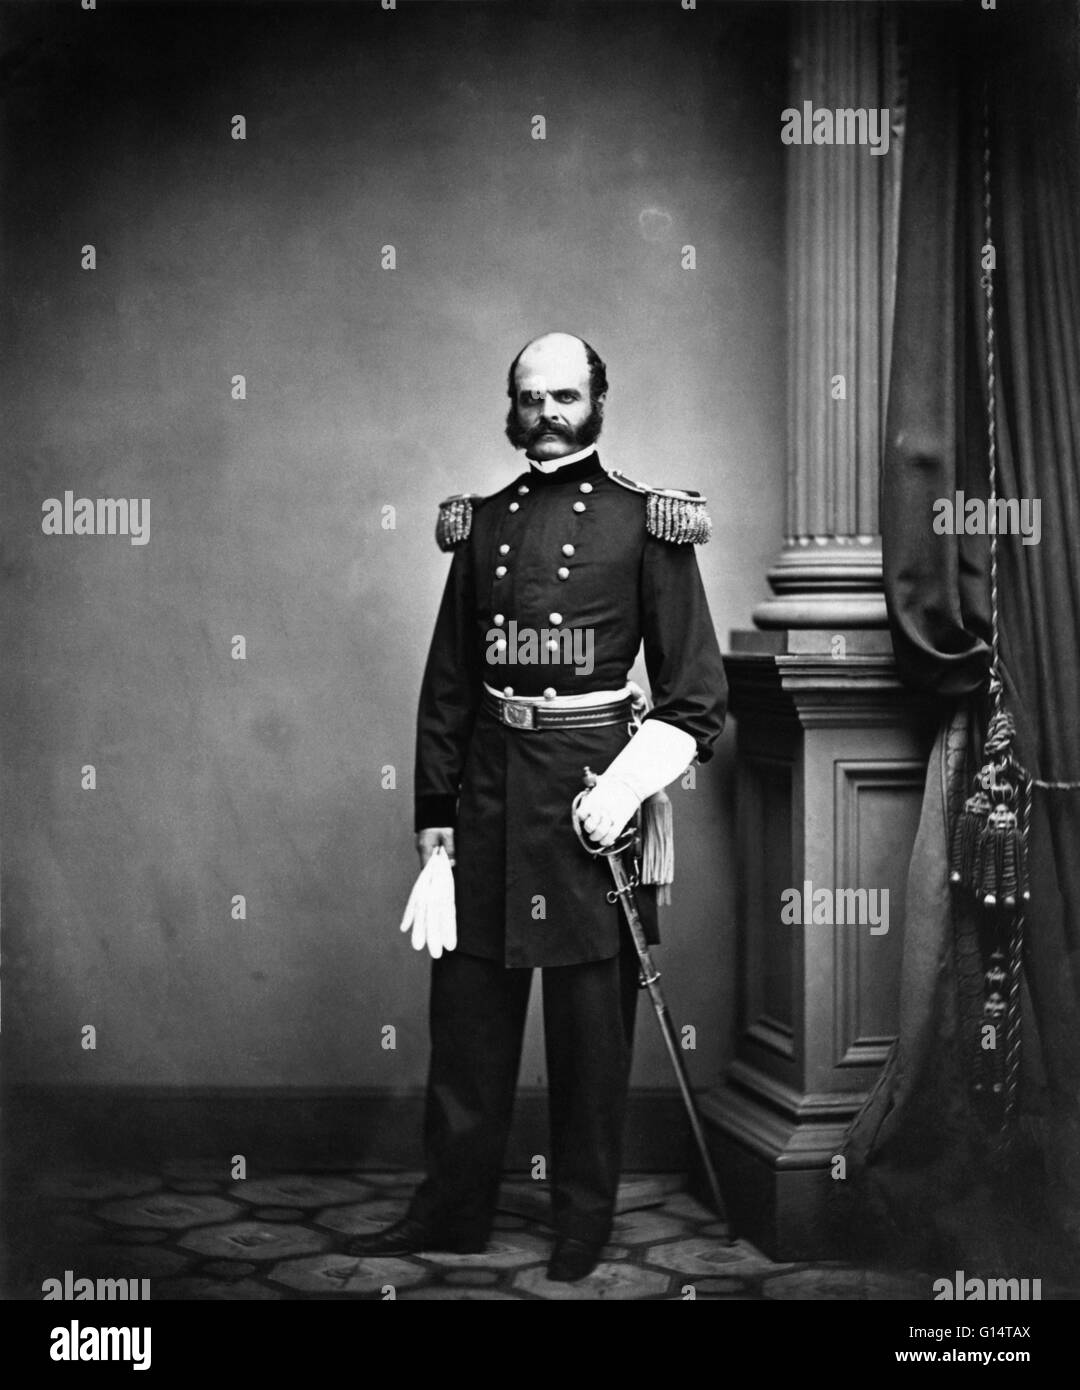 Entitled: General Ambrose E. Burnside of 1st Rhode Island Infantry Regiment and General Staff U.S. Volunteers Infantry Regiment with gauntlets and sword. Photographed by Mathew Brady. Ambrose Everett Burnside (May 23, 1824 - September 13, 1881) was an Ame Stock Photo